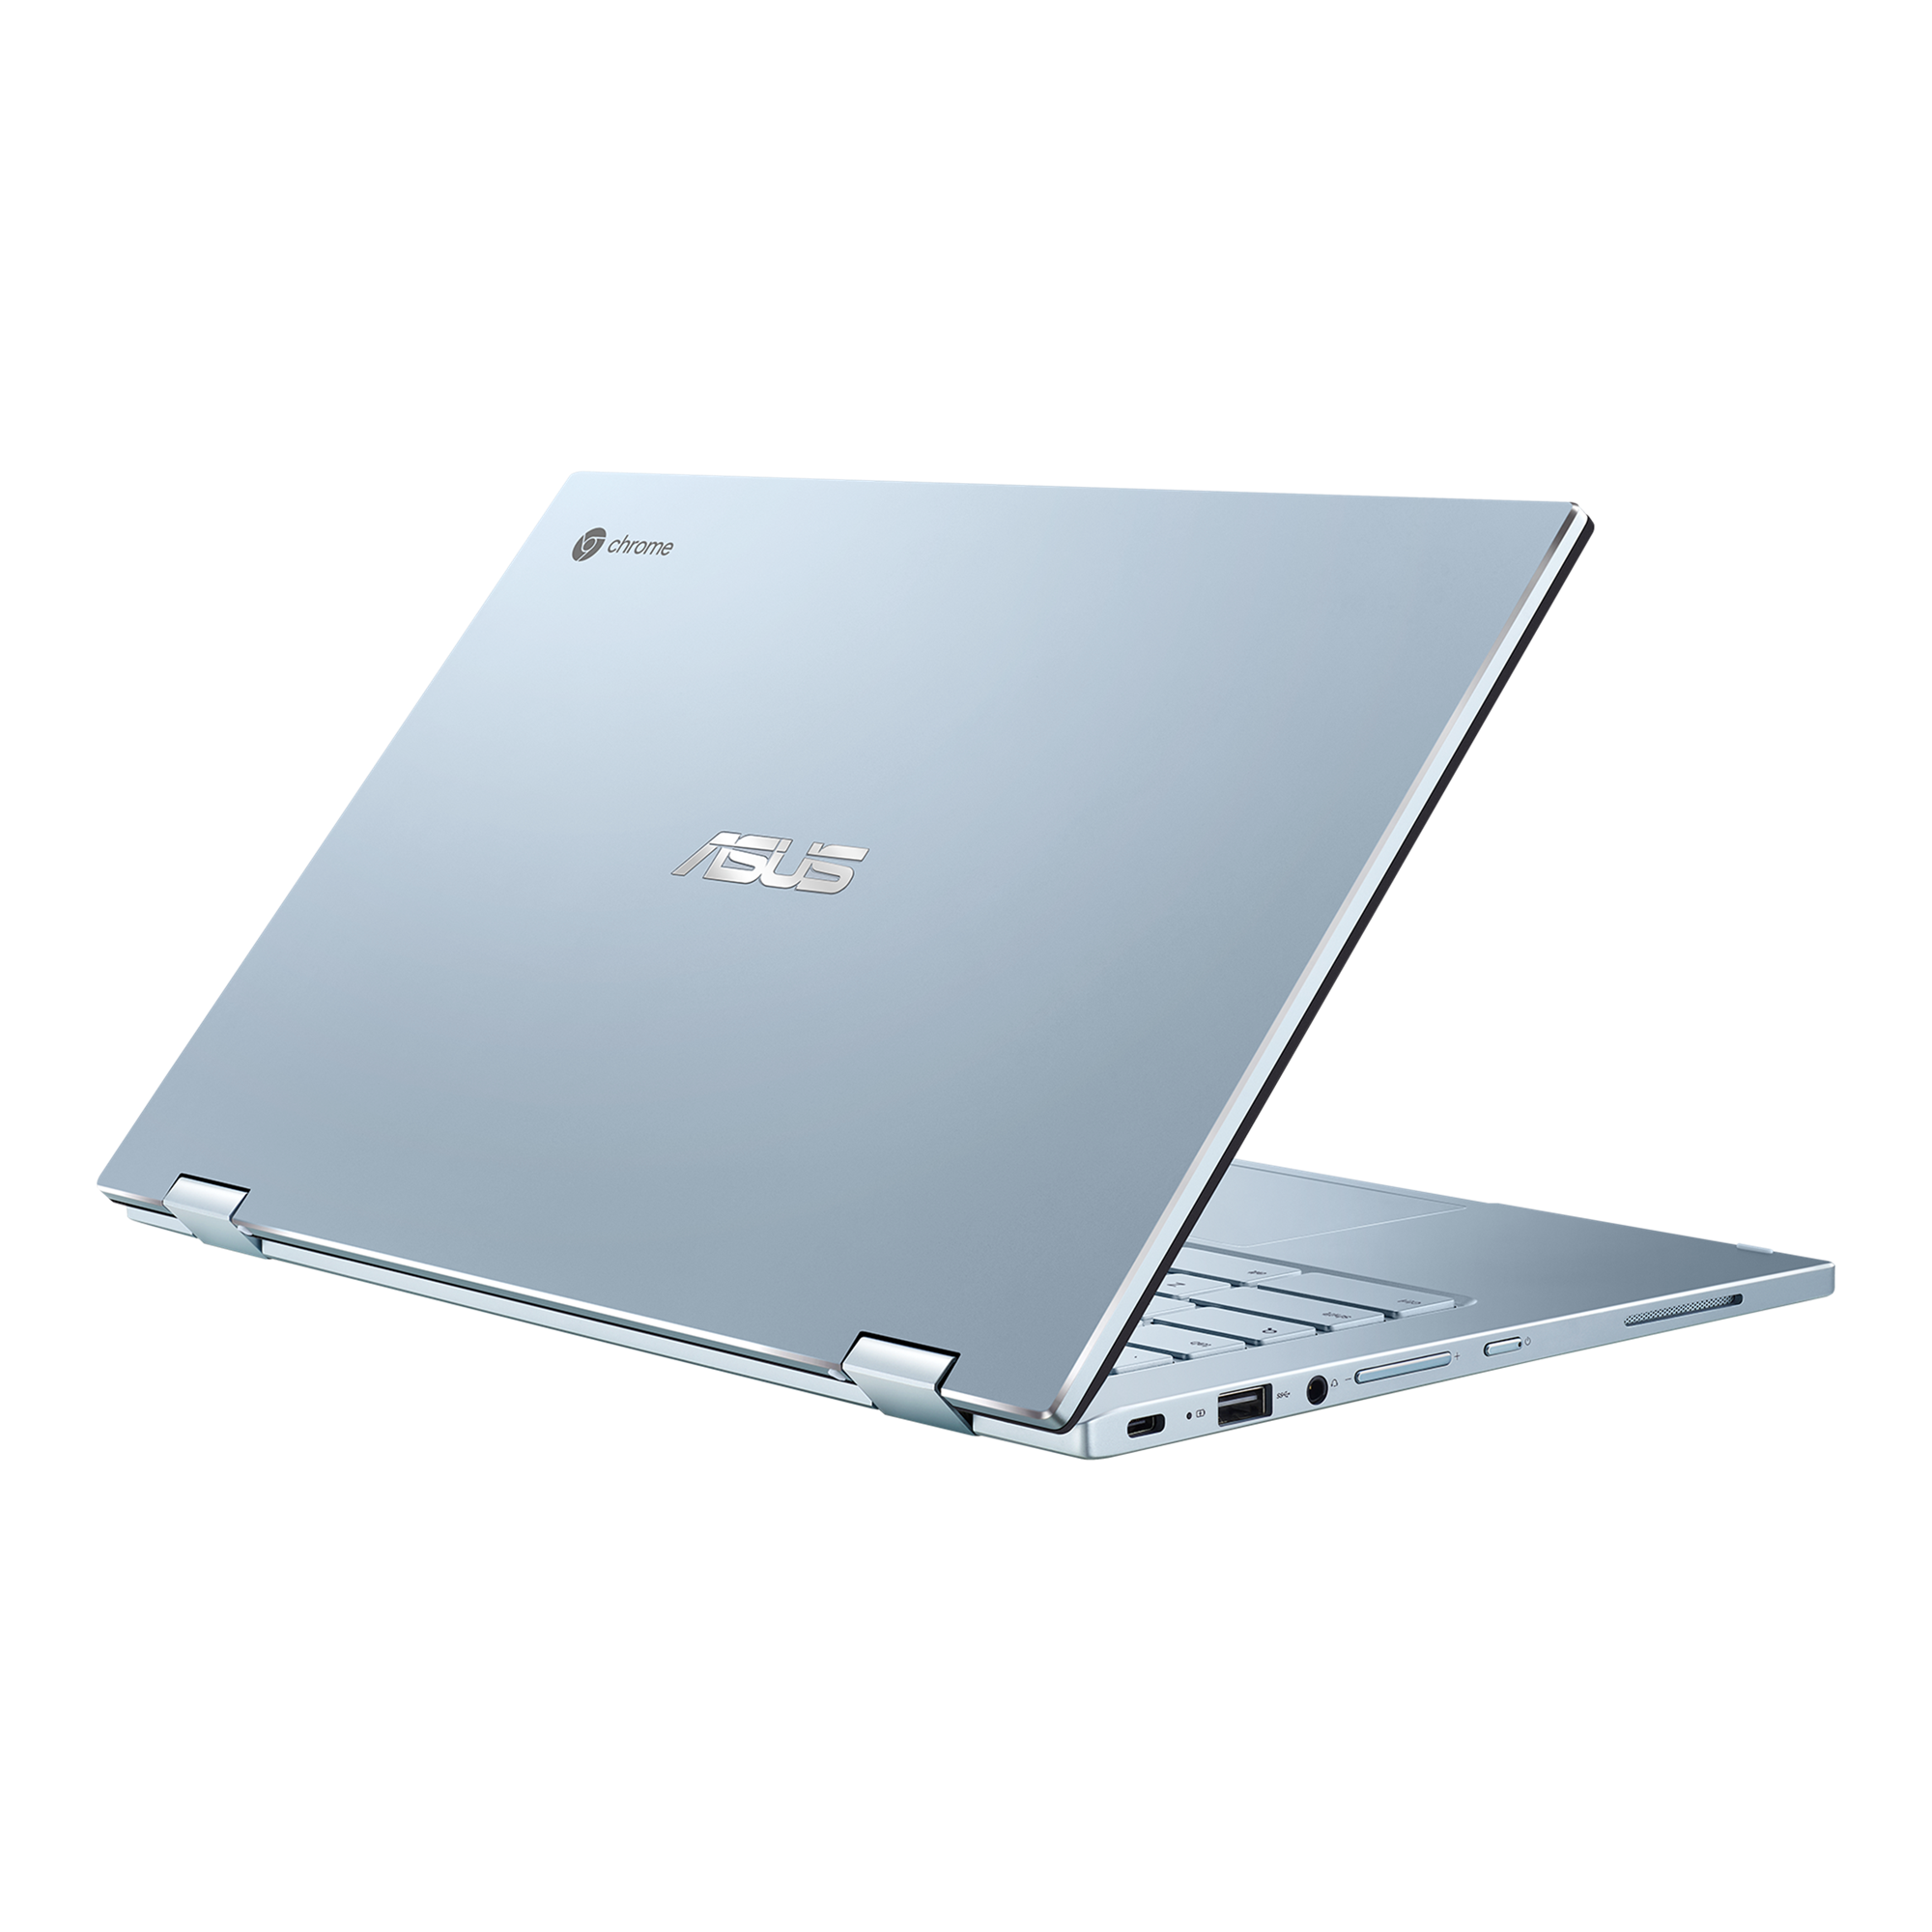 ASUS Chromebook Flip C433｜Laptops For Home｜ASUS USA